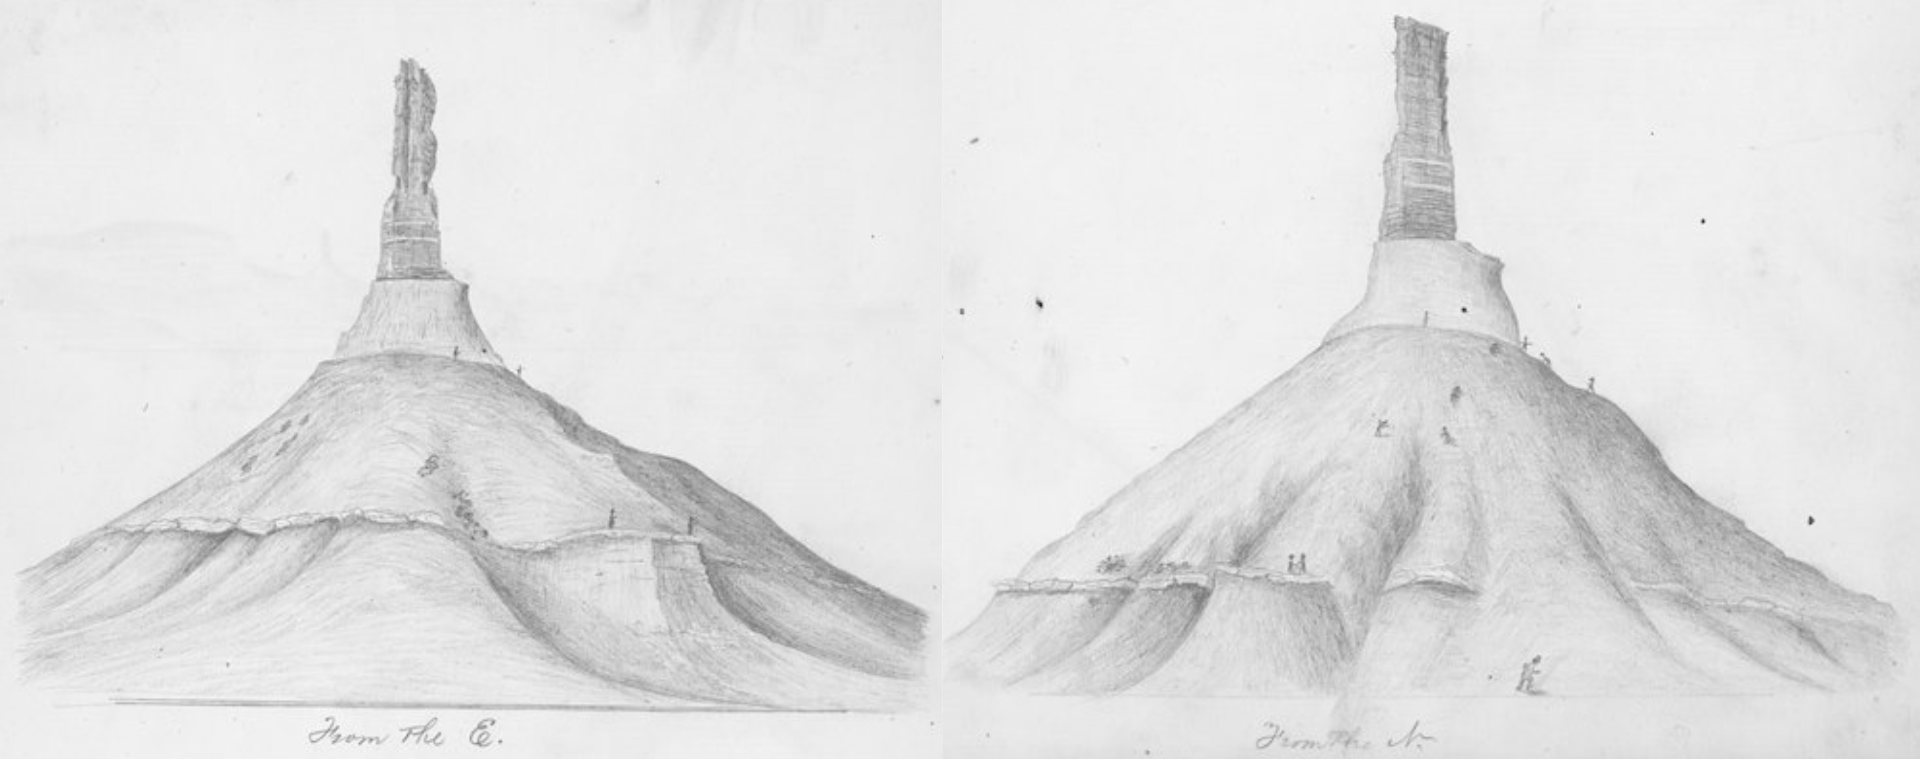 Courtesy of the Omaha World-Herald Quesenbury Sketchbook William Quesenbury traveled from Arkansas to California in 1850 but returned to the states the following year.  During his journey, he produced a series of finely-penciled sketches, including this magnificent view of Chimney Rock from the east. 